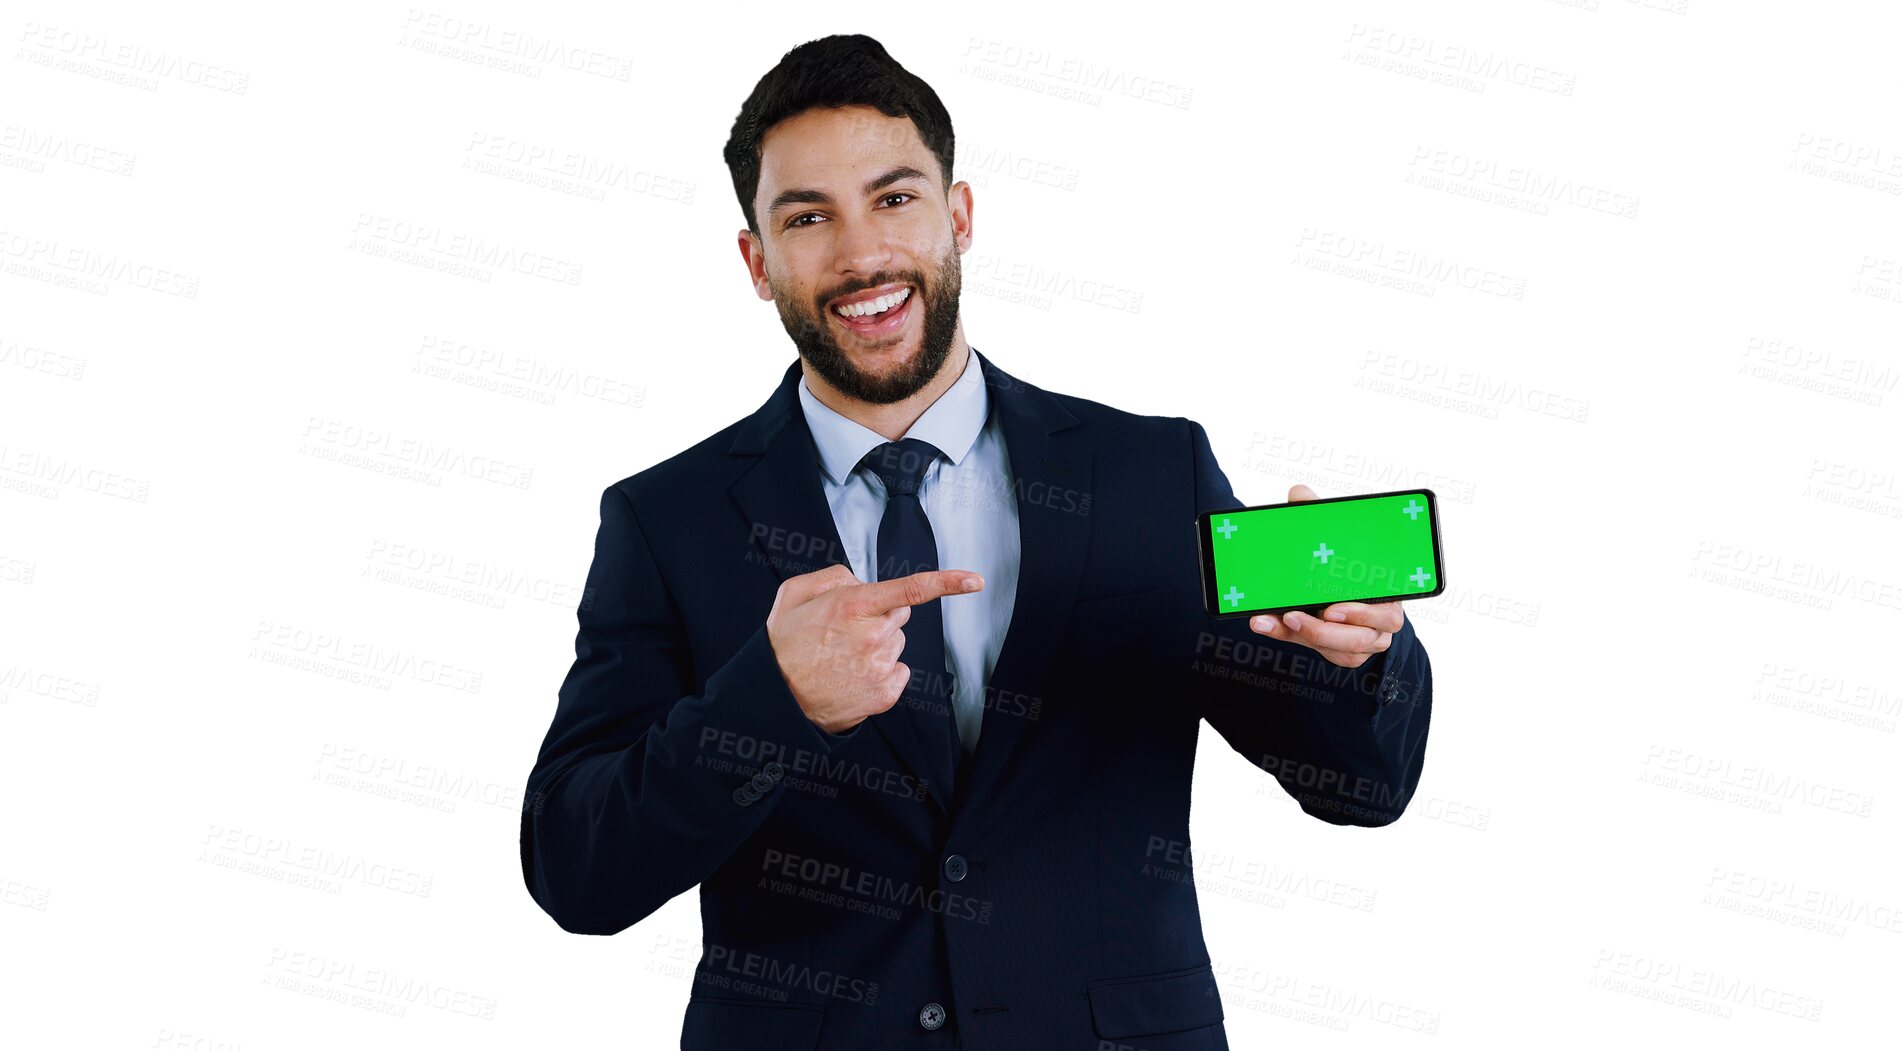 Buy stock photo Businessman, hand and phone with green screen in portrait, pointing to social media on transparent or png background. Smartphone, registration and job from web, application or isolated feedback